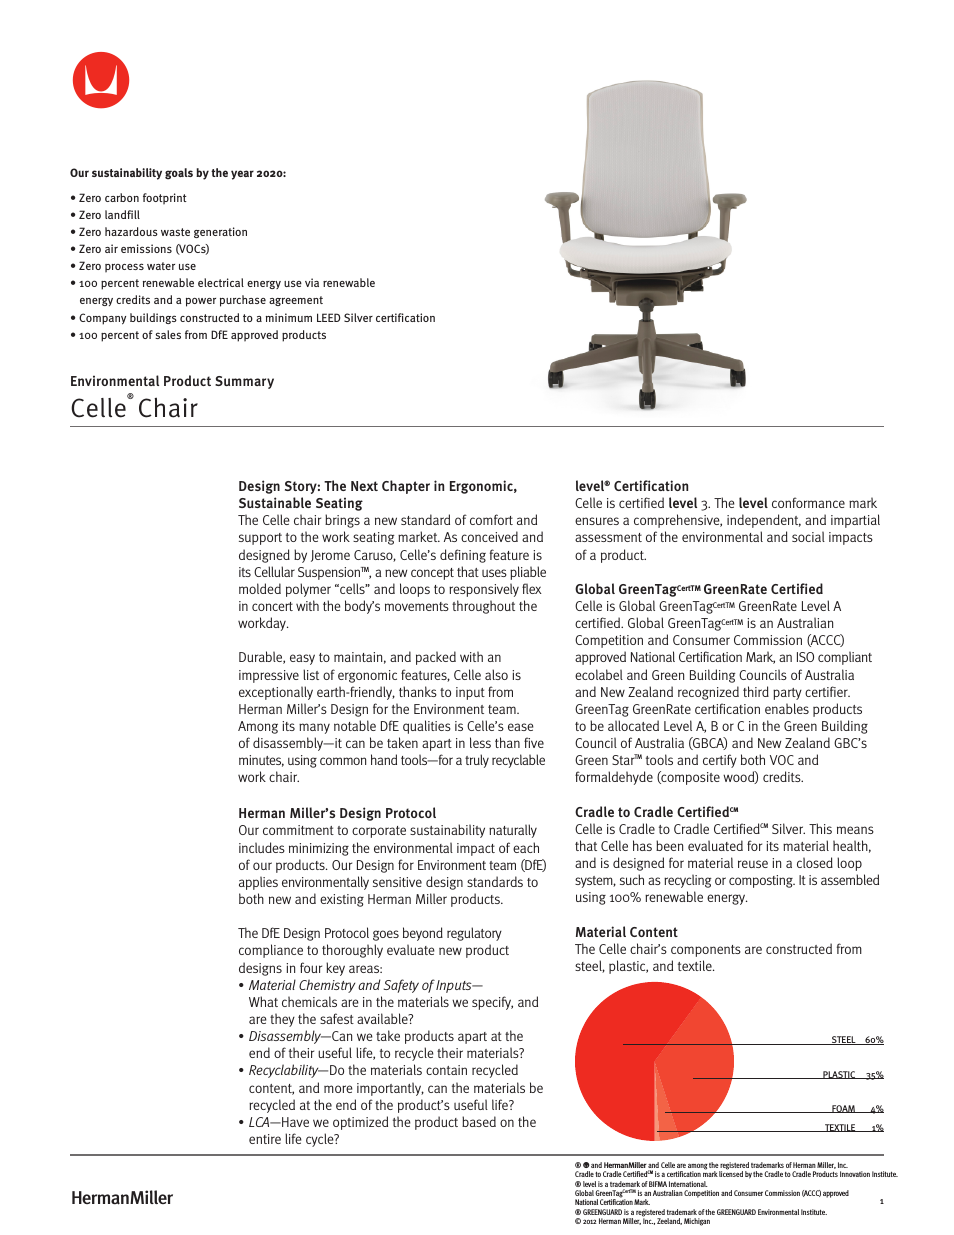 Celle Chairs - Environmental Product Summary